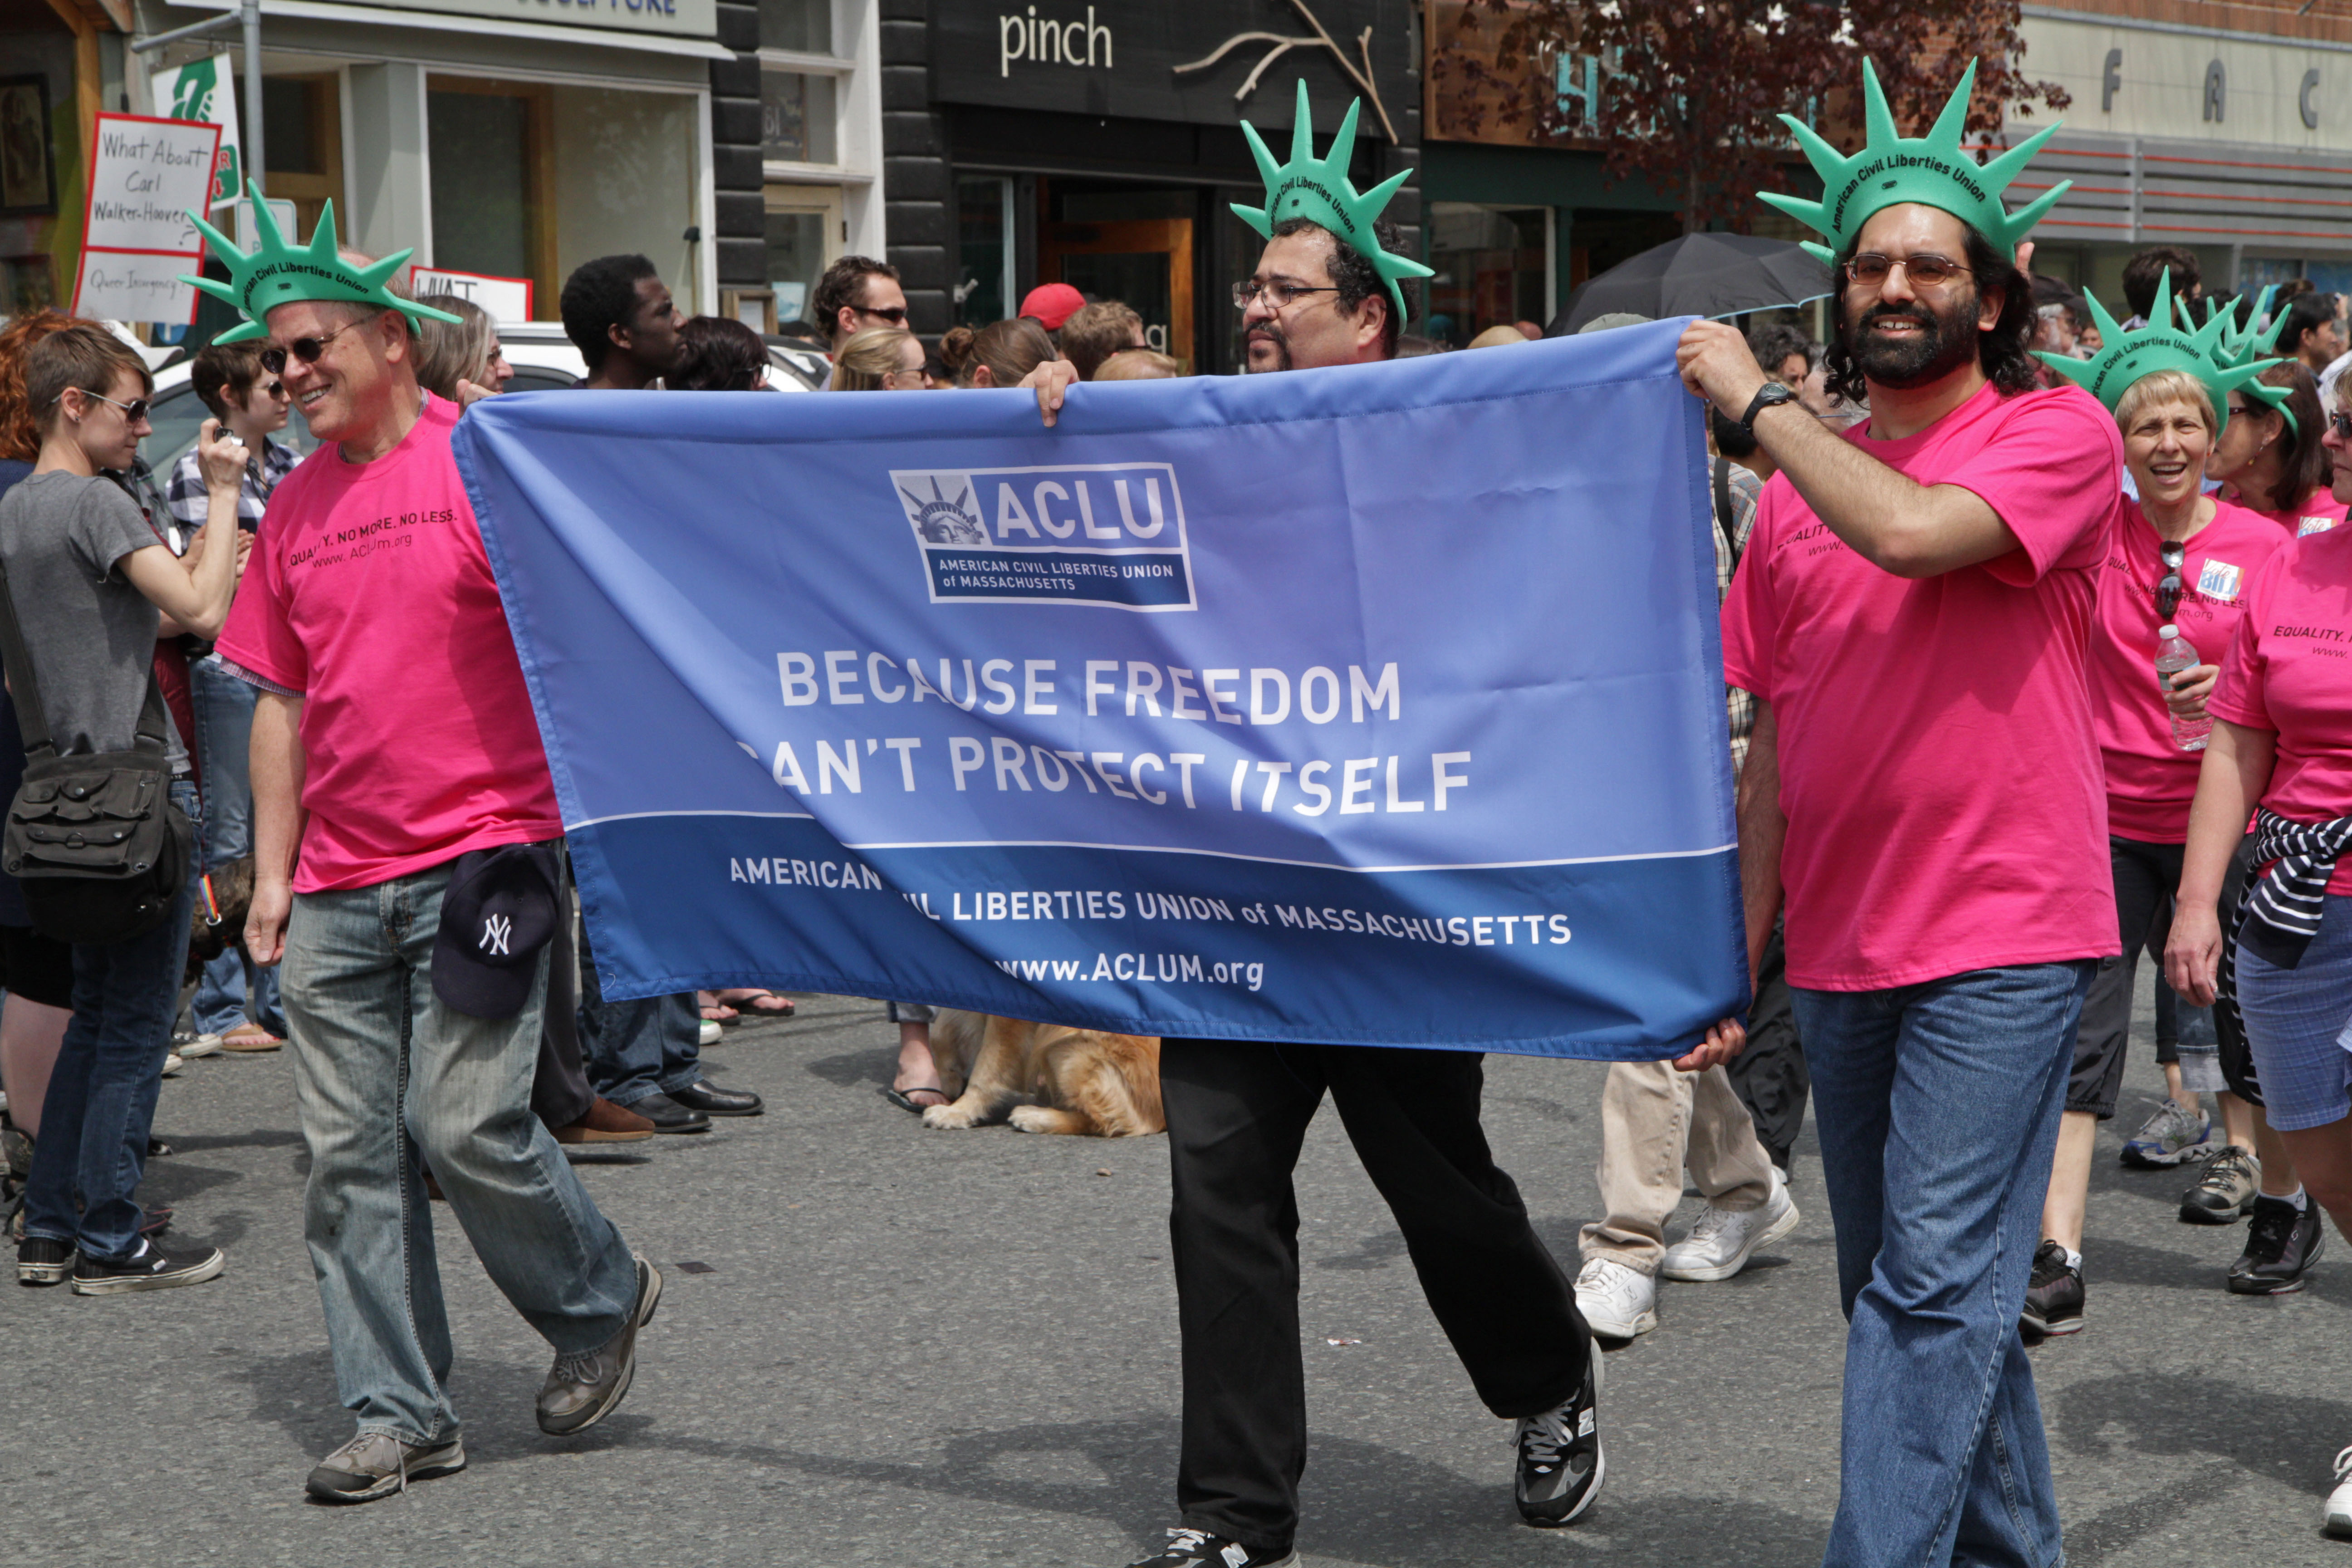 ACLU supporters at a rally.